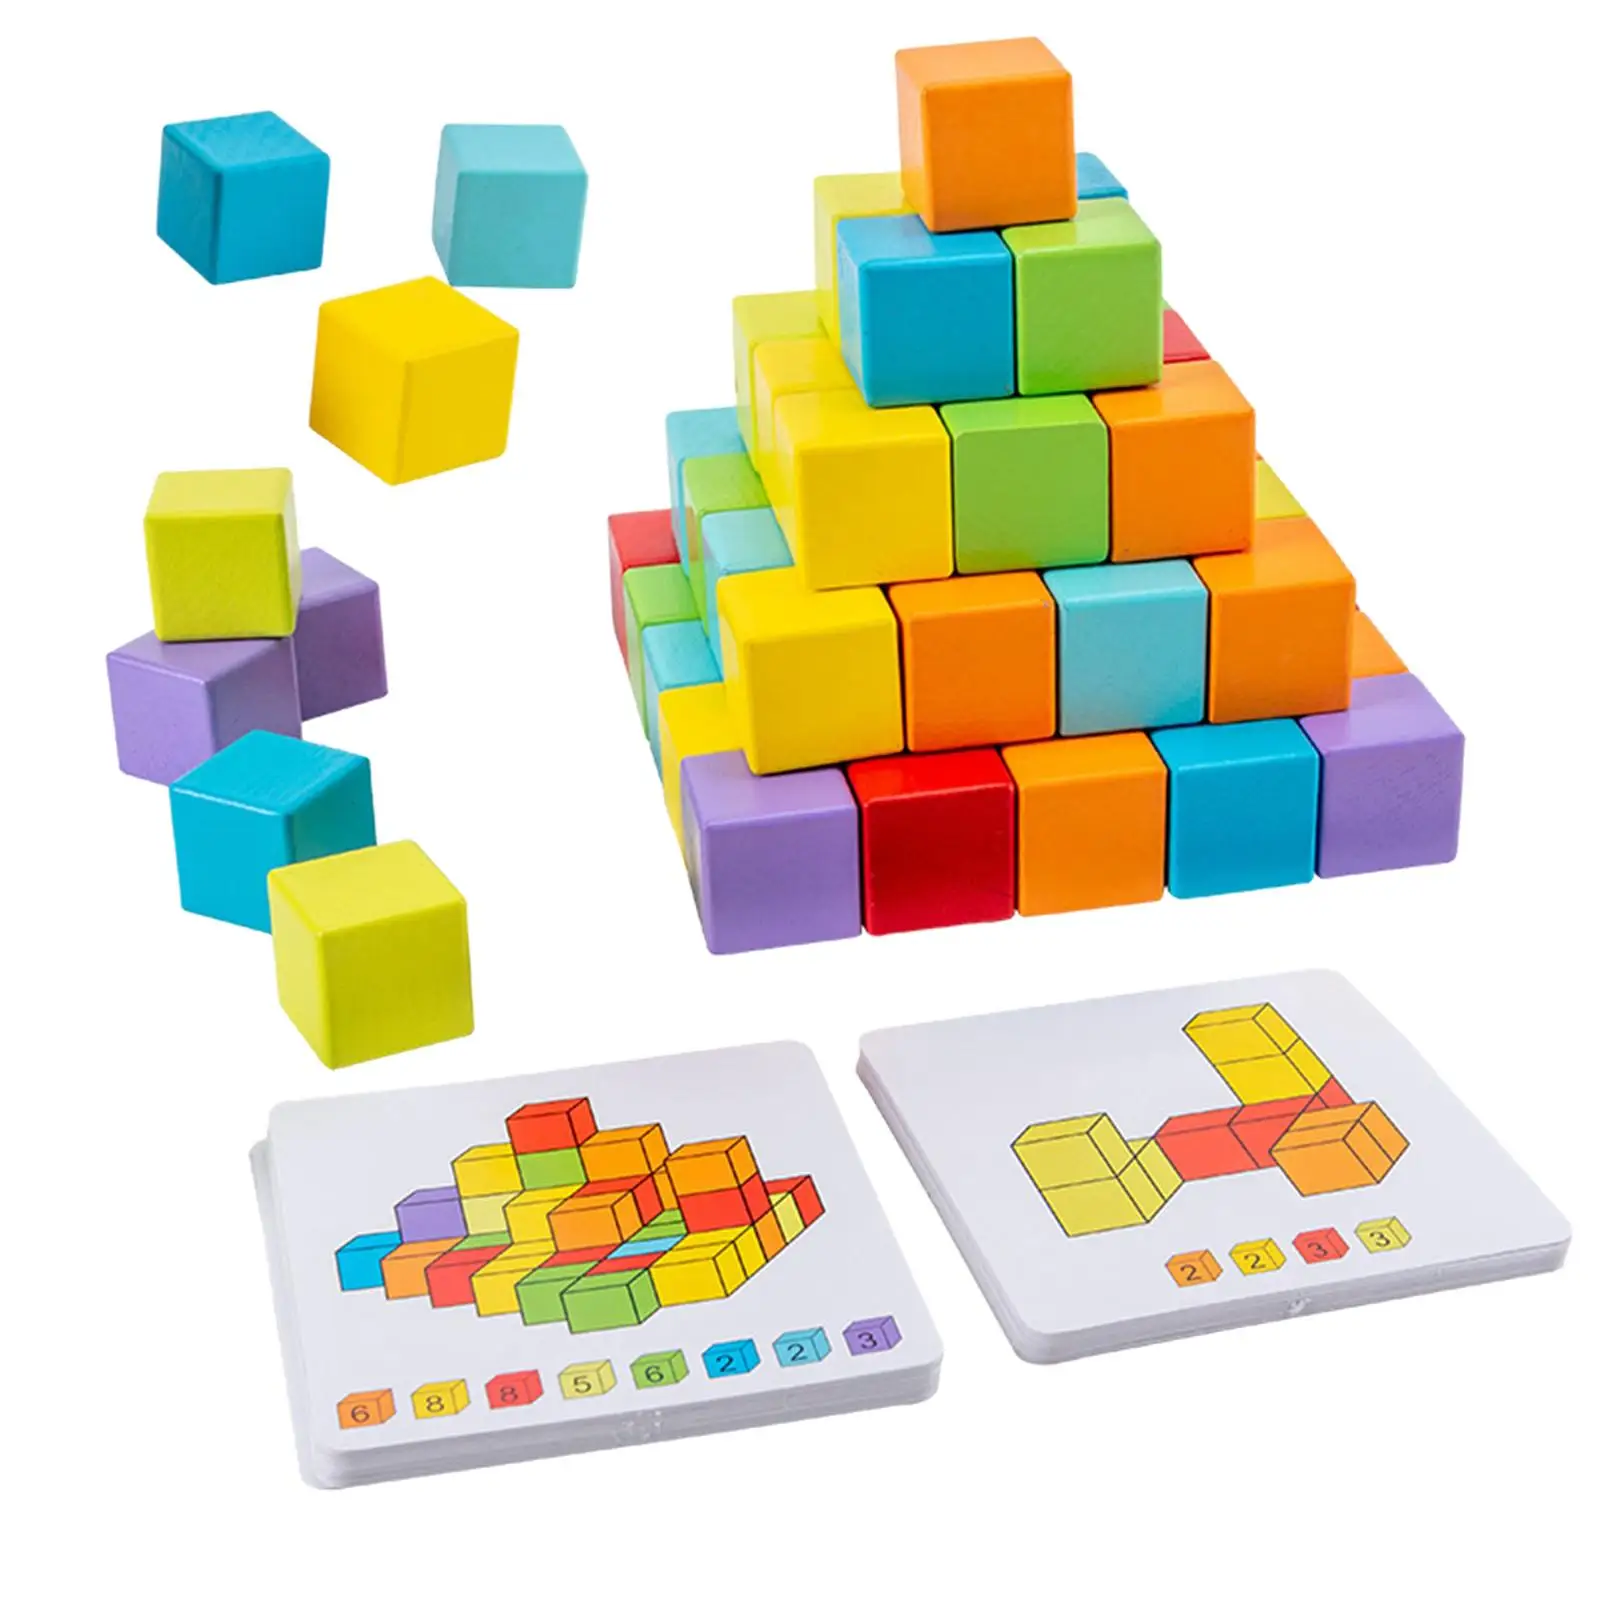 Wooden Building Blocks Stacking Game with Double Sided Cards Sensory Toys,